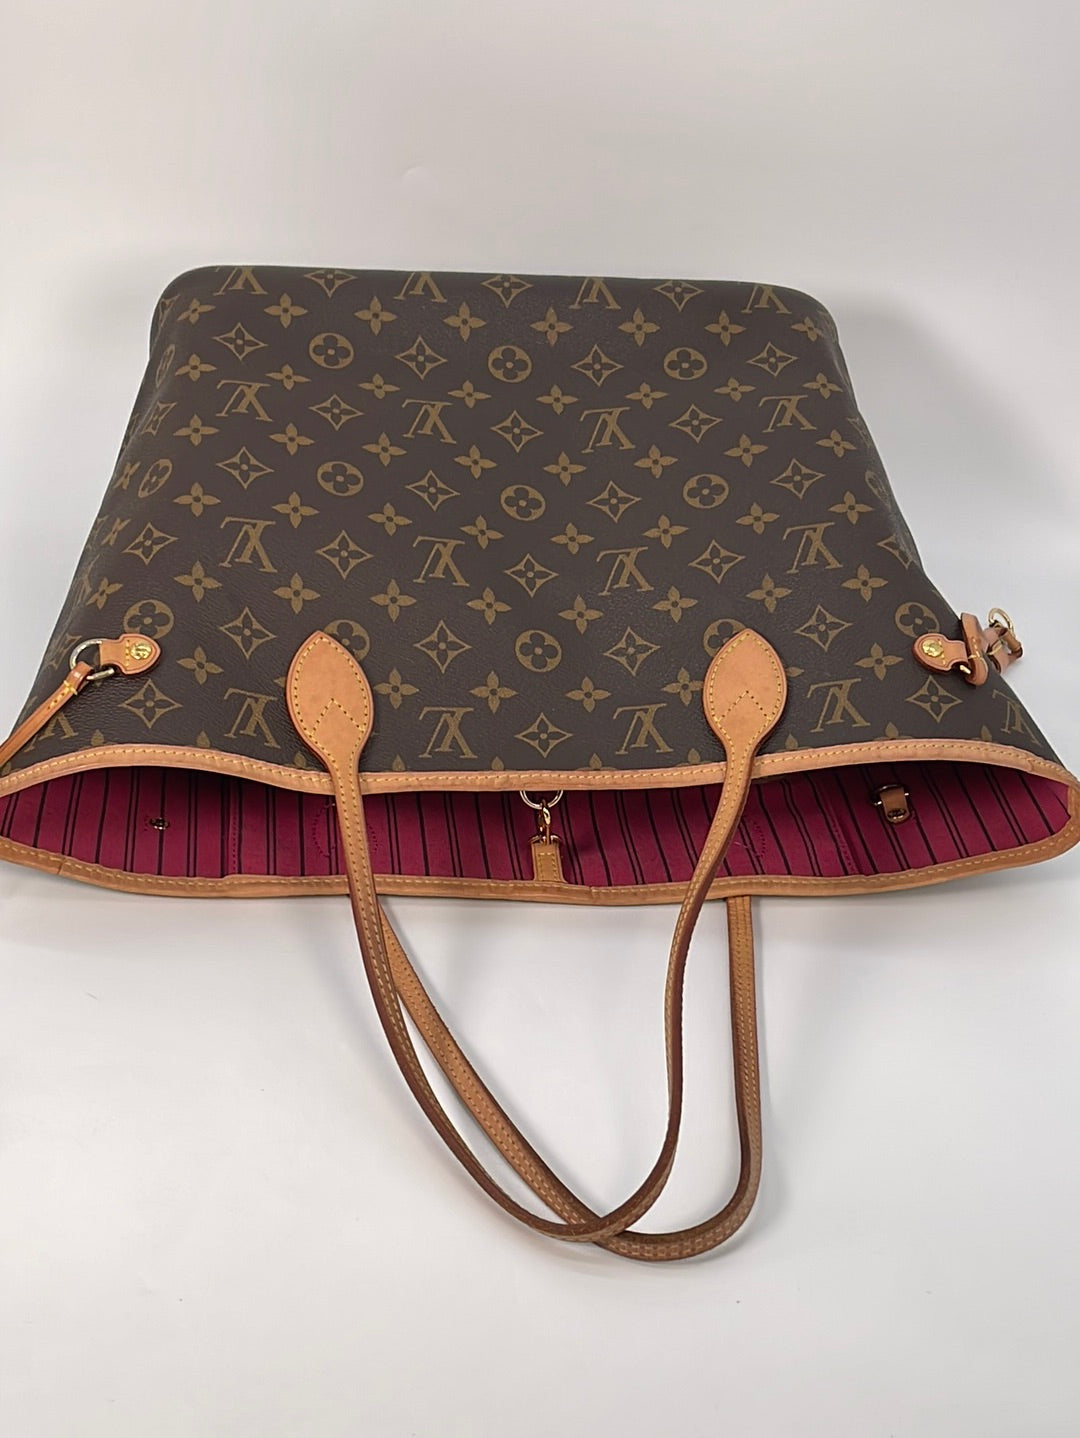 louis vuitton neverfull with pink lining